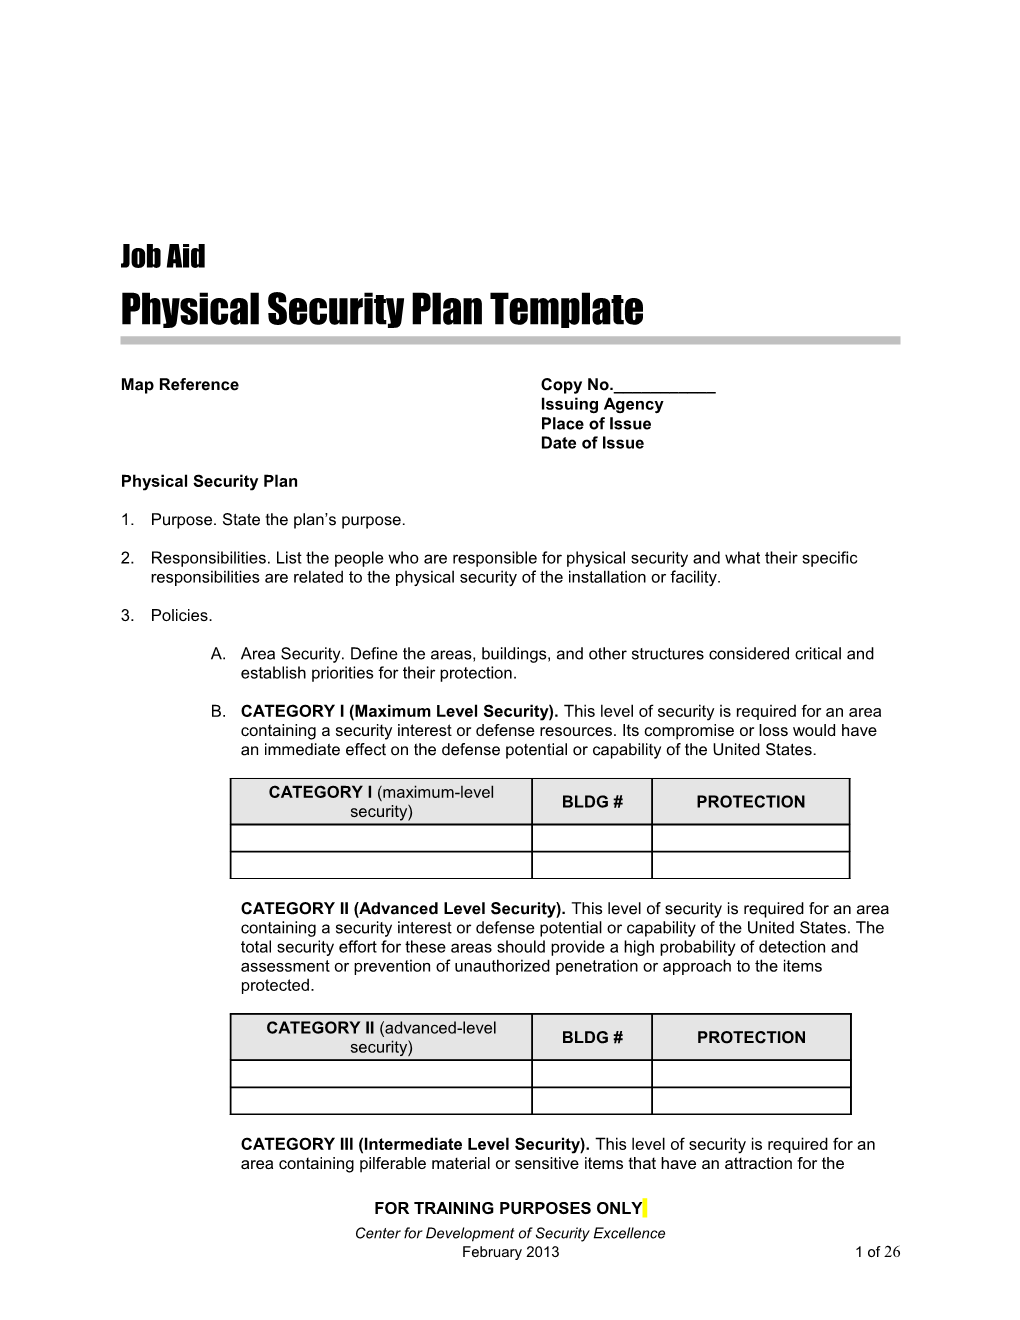 Physical Security Plan Template